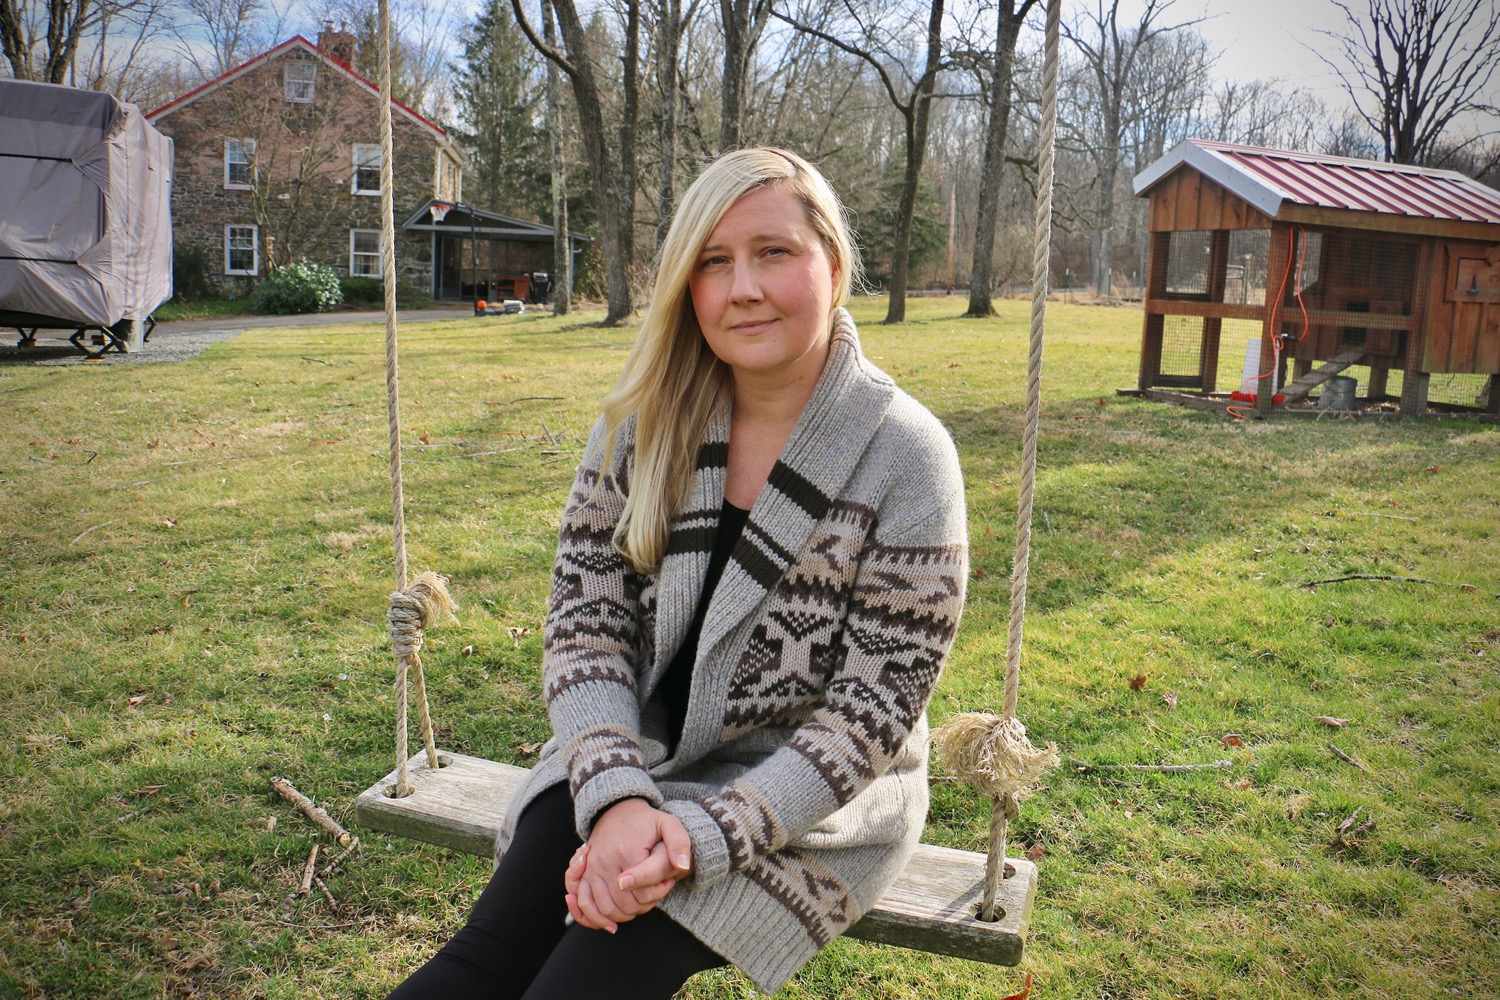 a white blonde-haired woman sitting on a swing outside looking pensive at the camera. behind her is grass, a shed, and a house